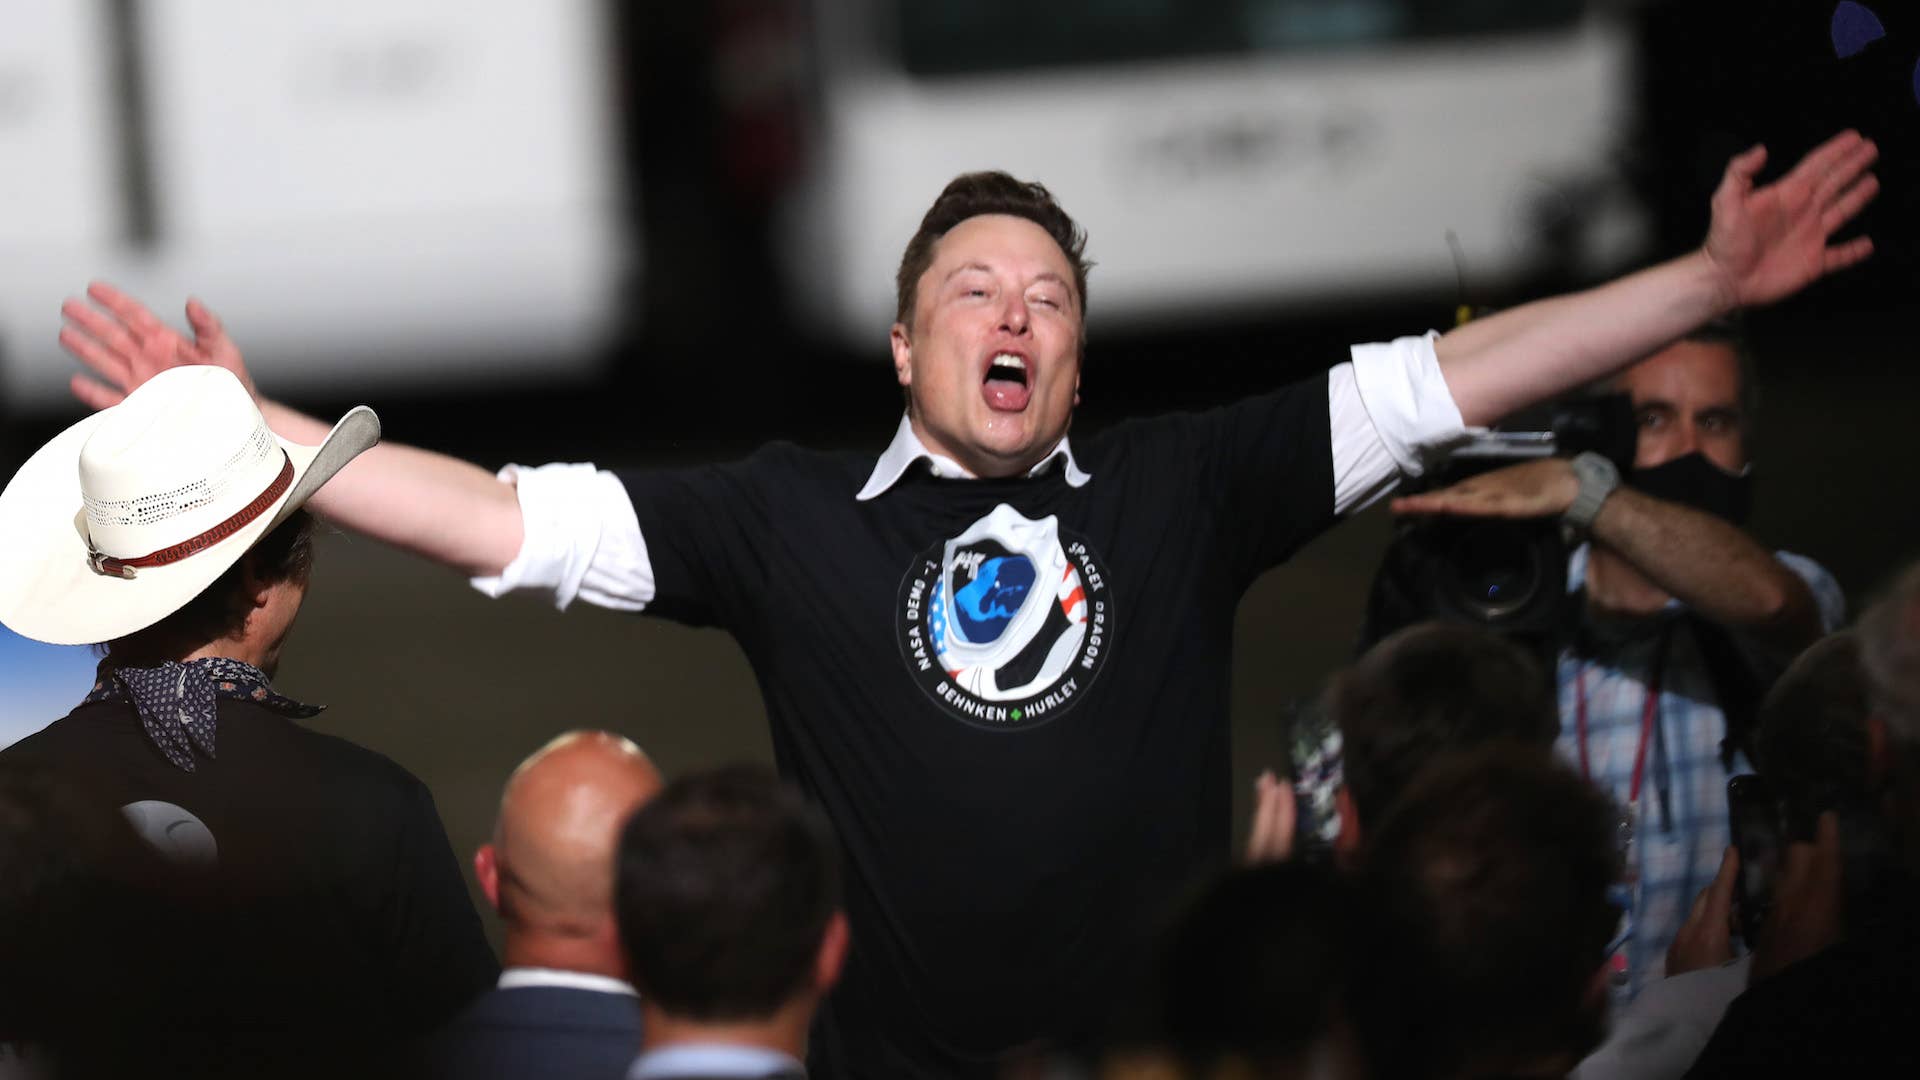 Spacex founder Elon Musk celebrates after the successful launch